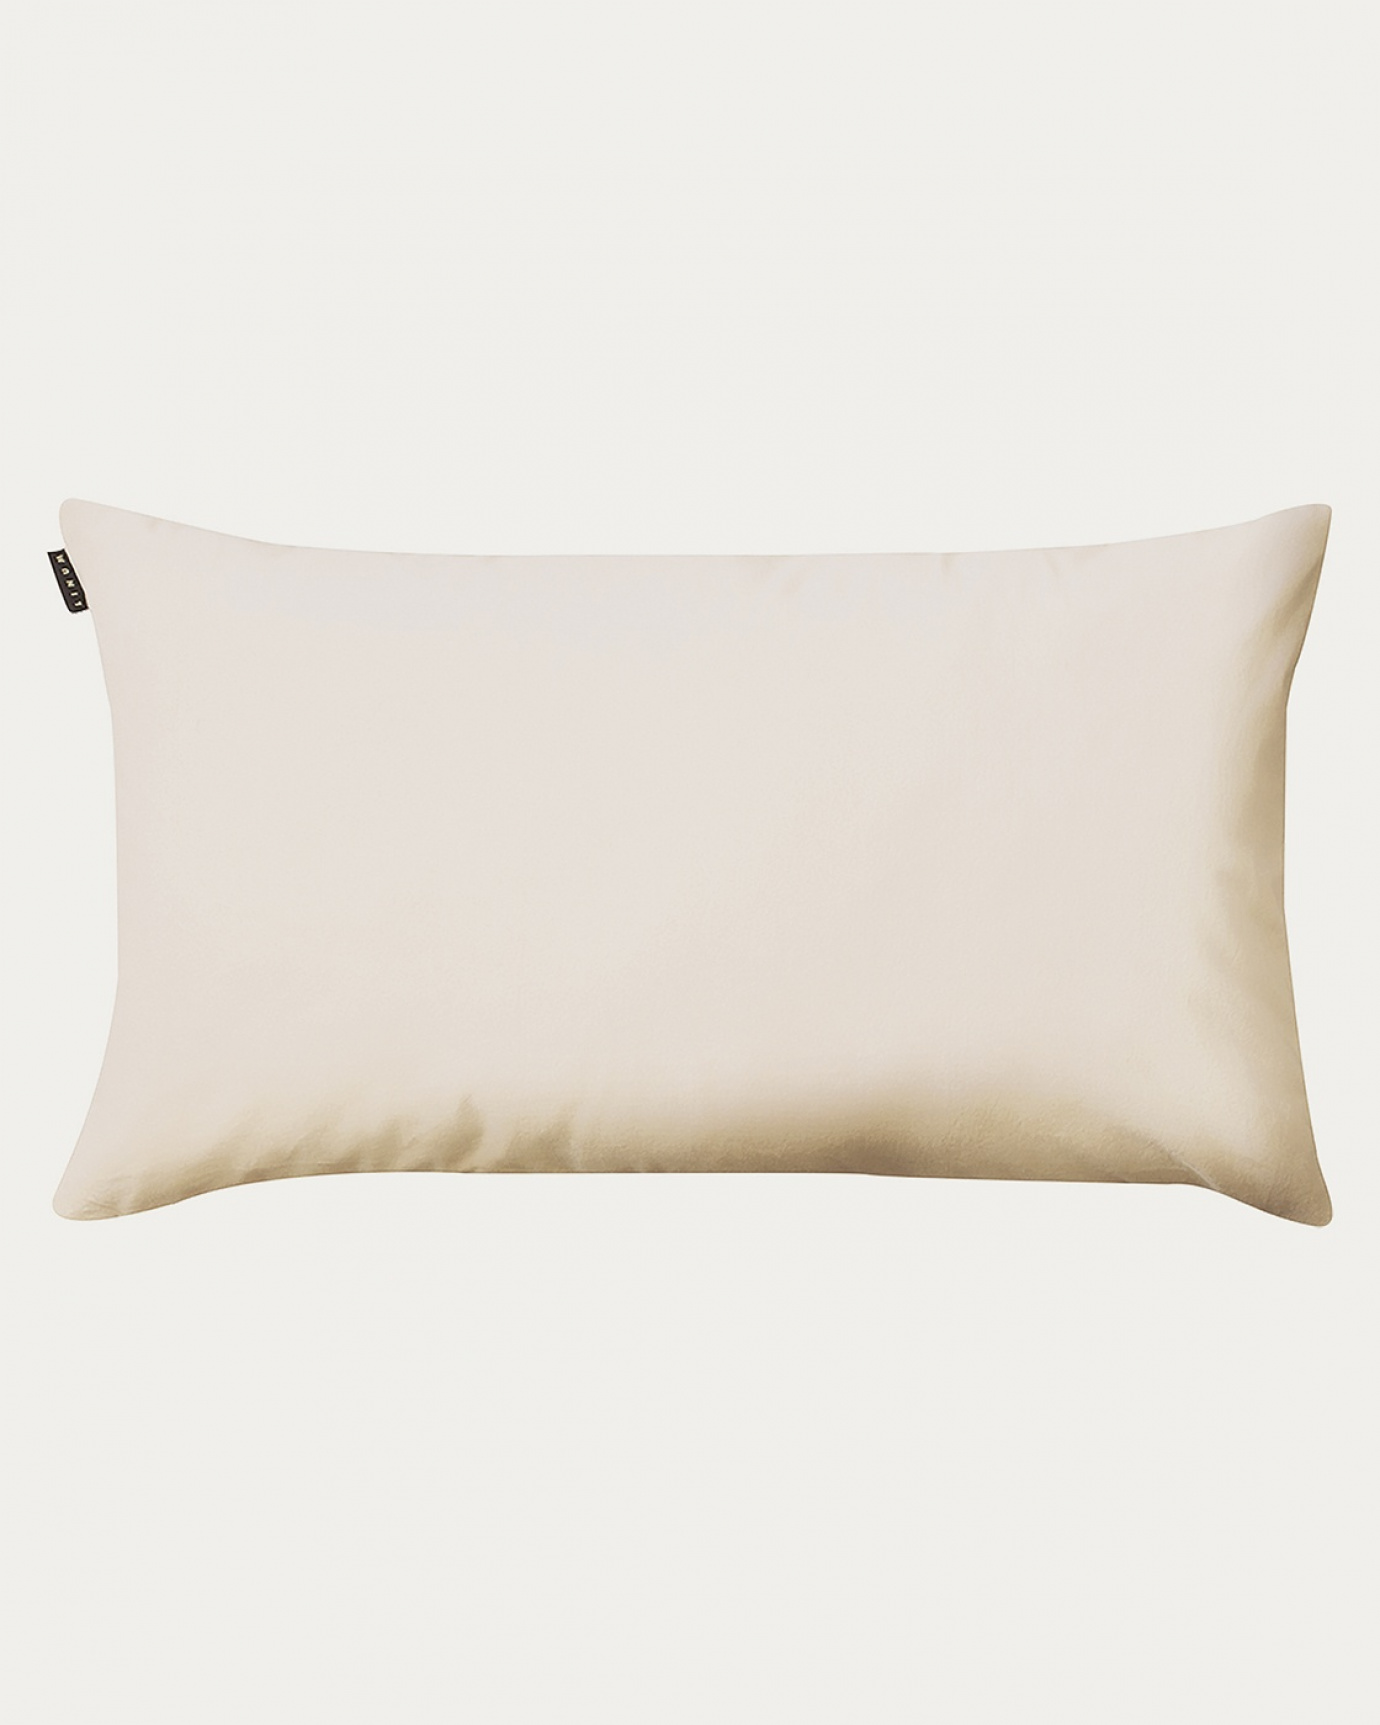 Product image creamy beige PAOLO cushion cover made of soft cotton velvet and 100% linen from LINUM DESIGN. Size 50x90 cm.